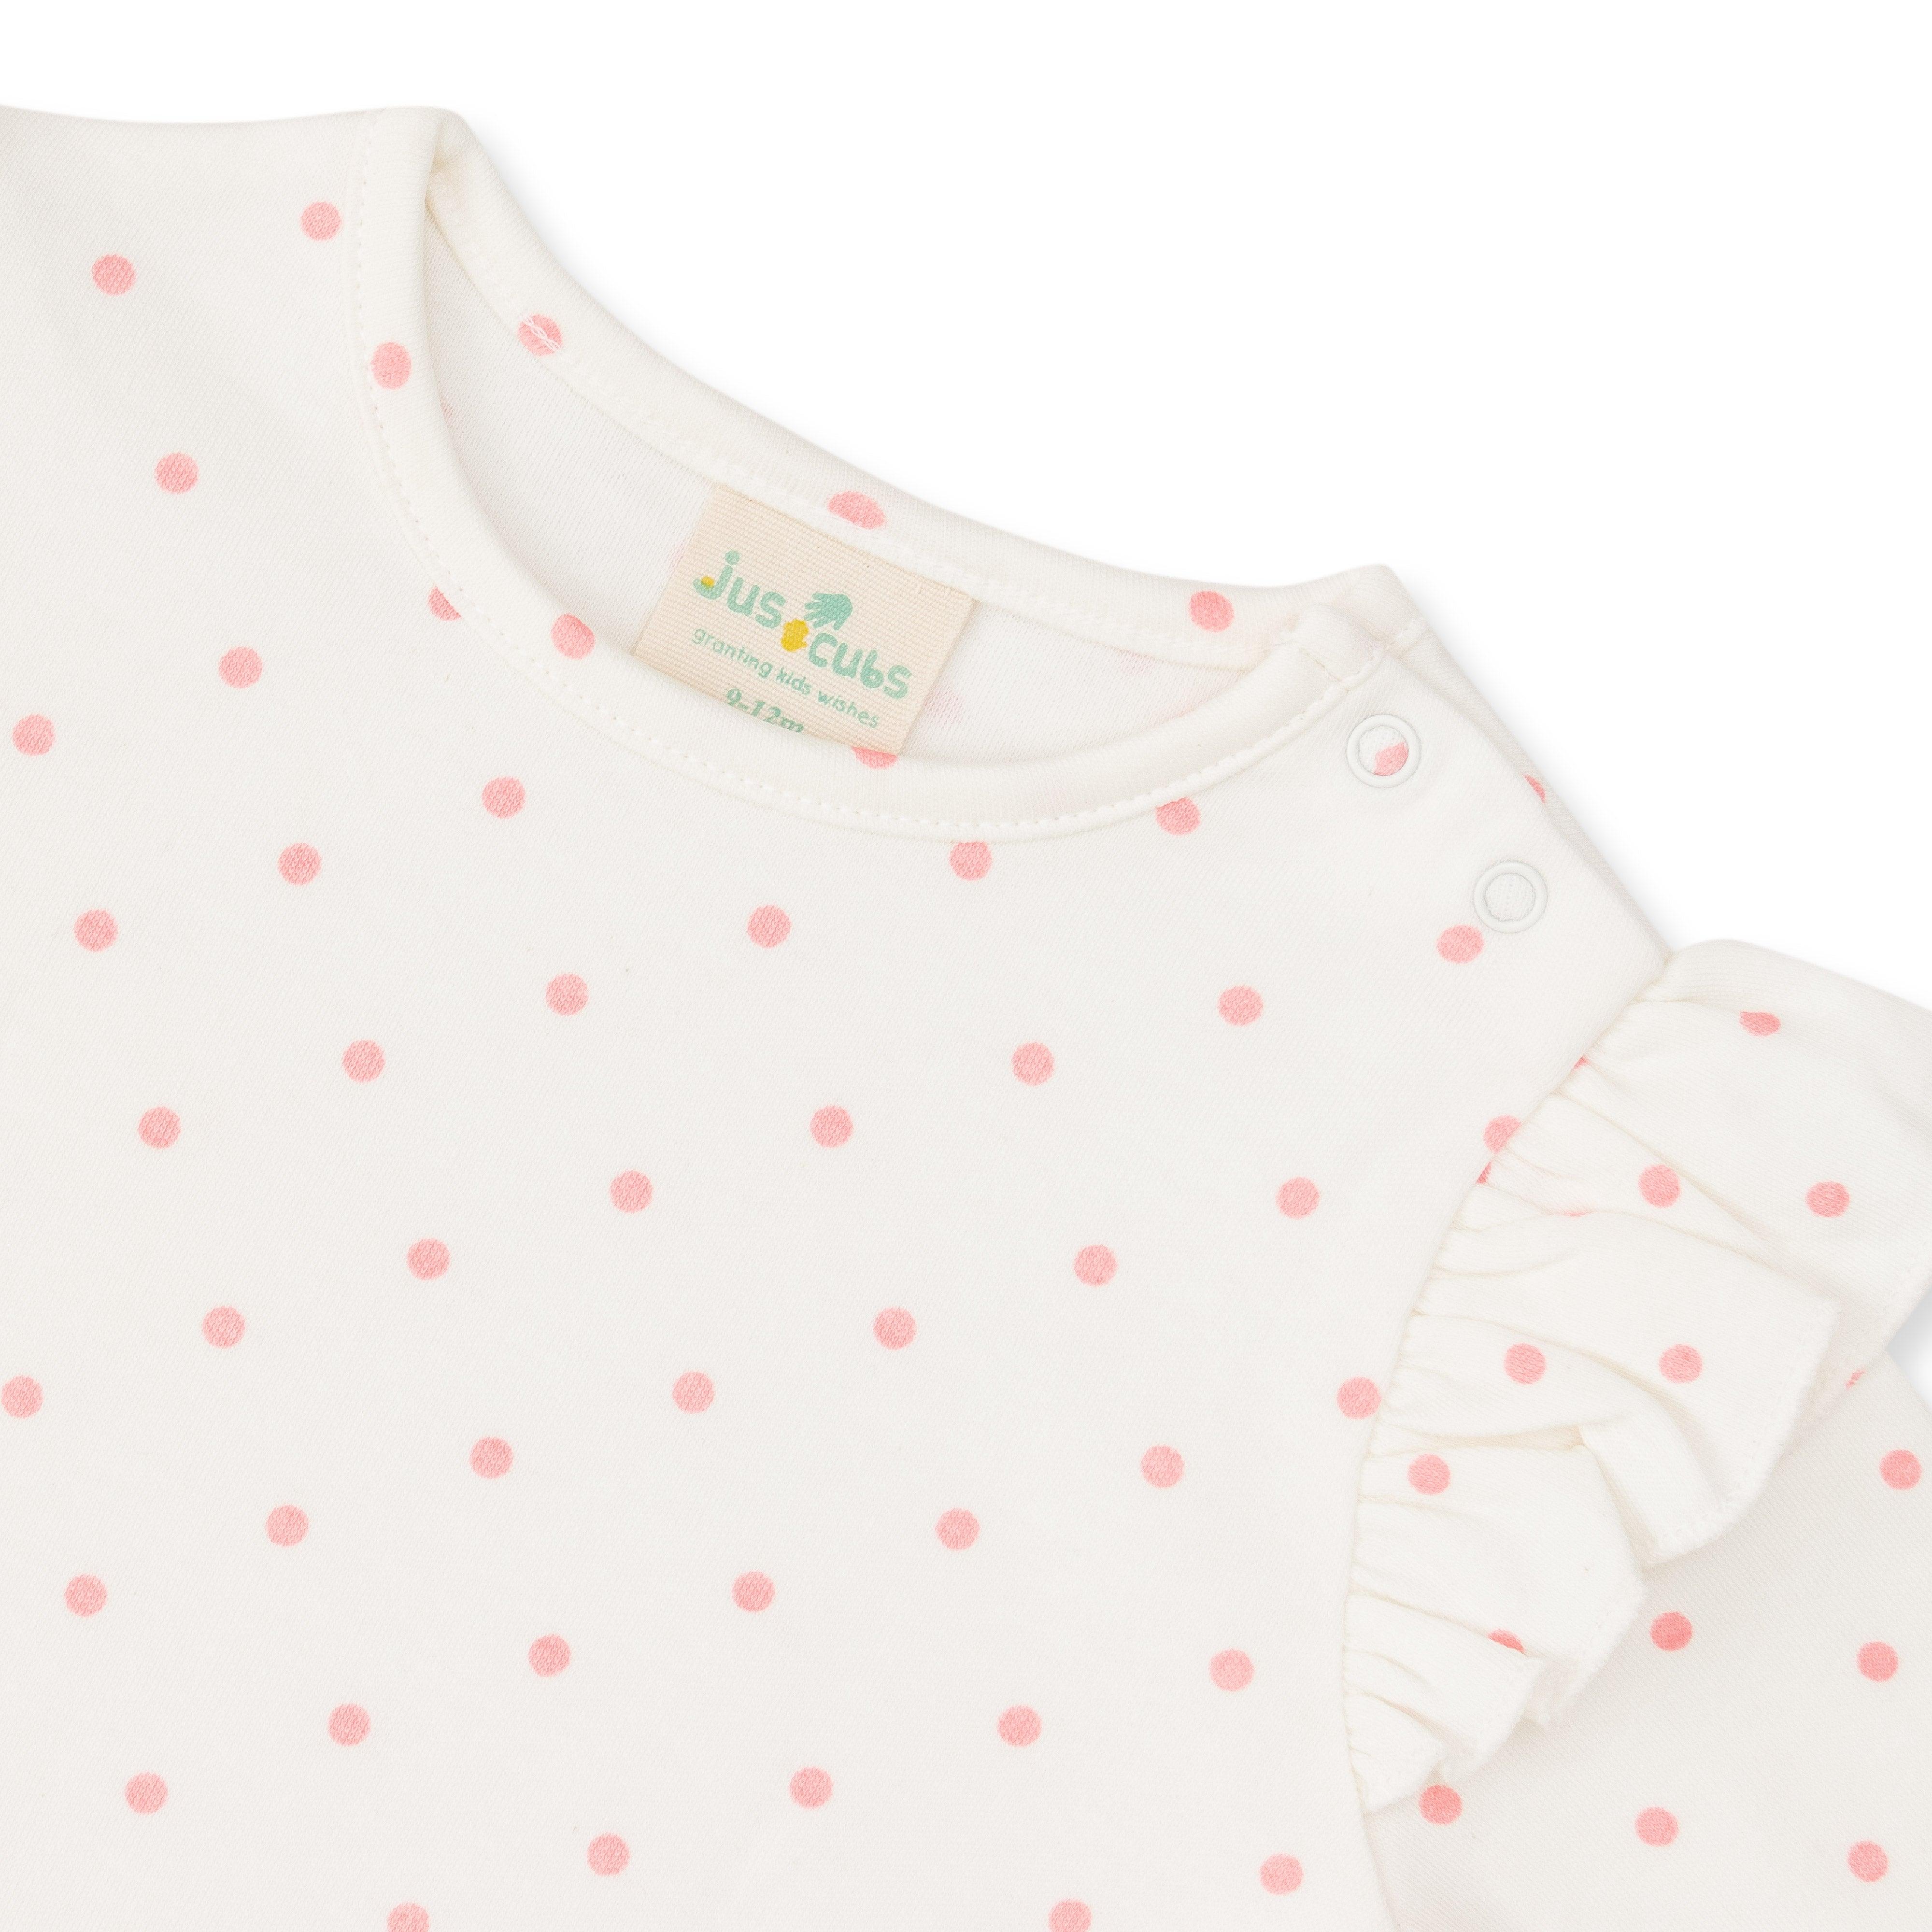 Baby Girls Solid Dungaree & Polka dots Top - Juscubs